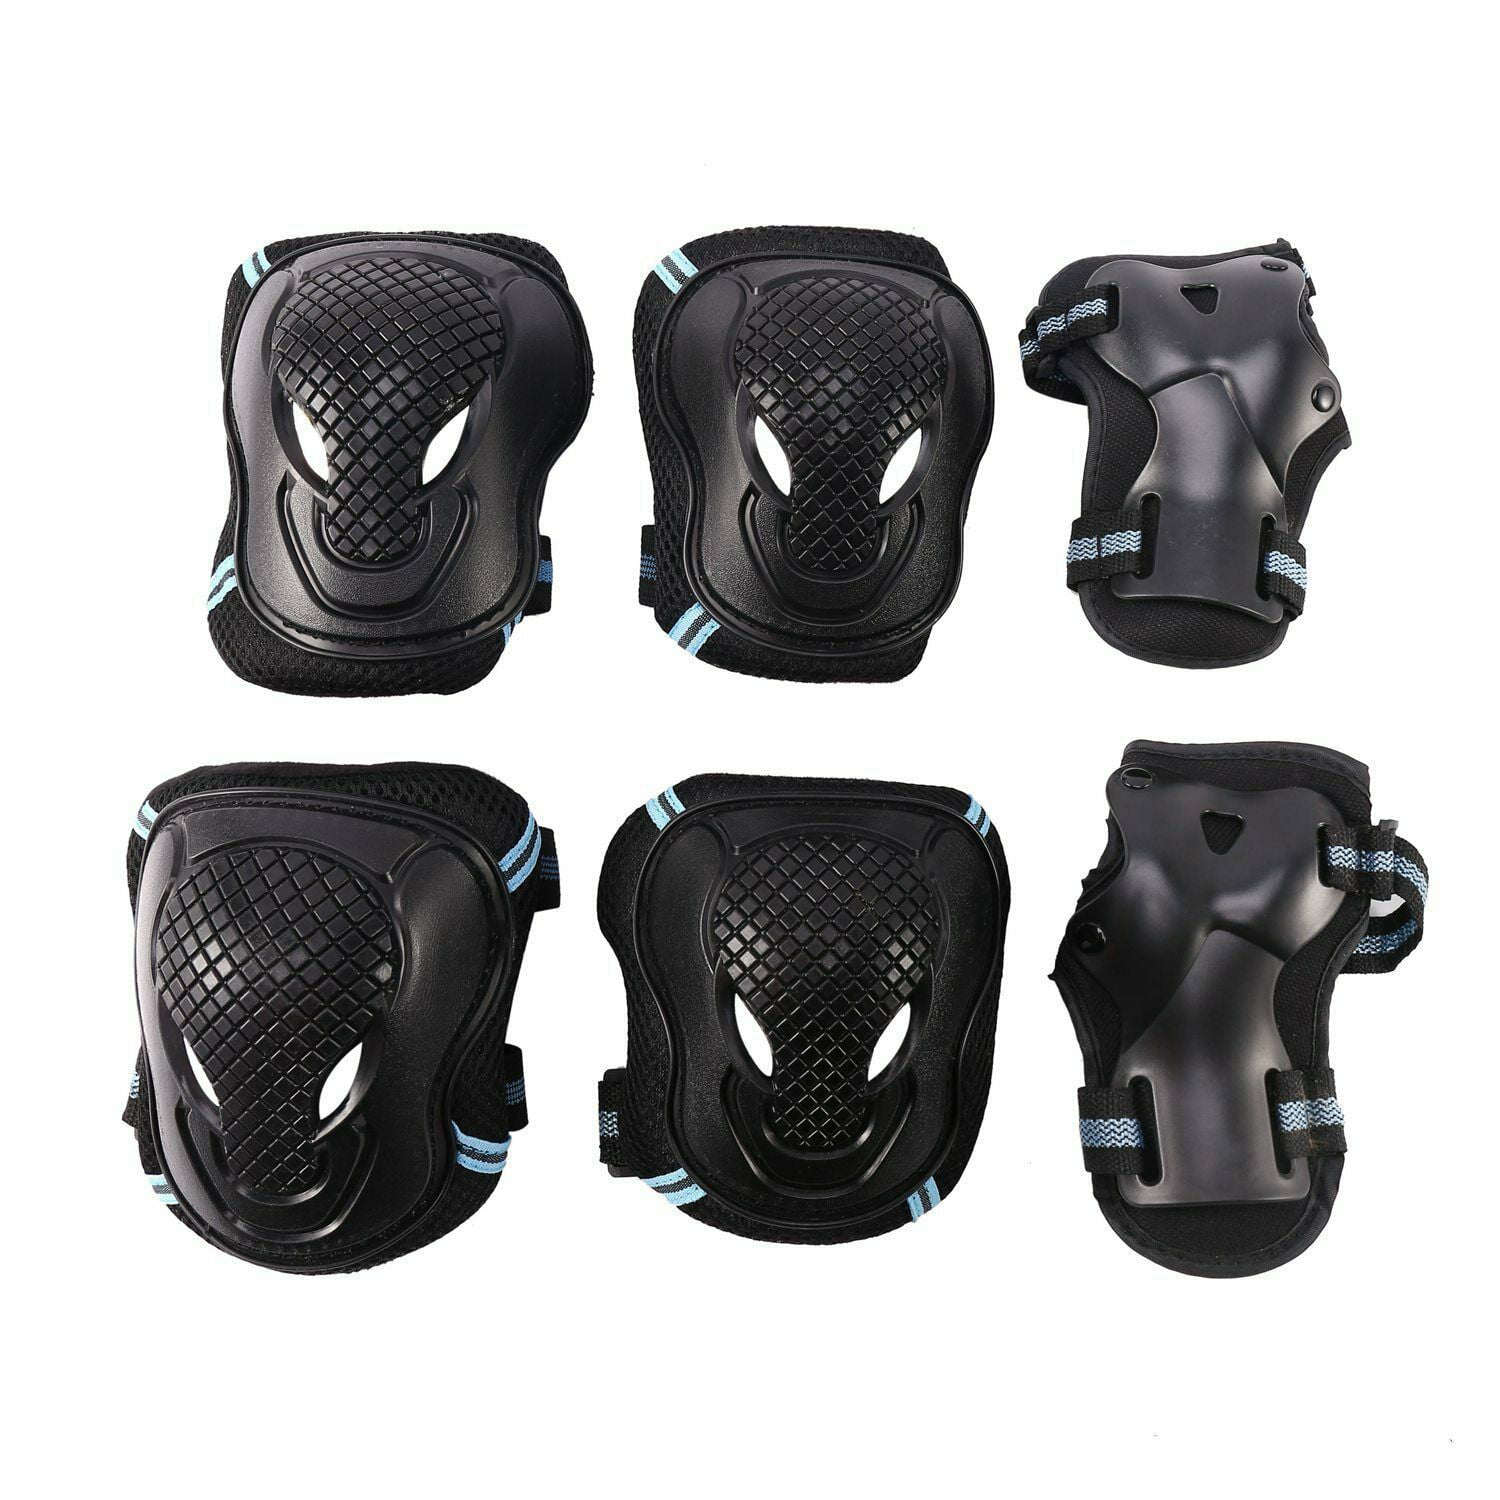 Details about   6x Elbow Wrist Knee Pads Sport Safety Protective Gear Guard for Kids Adult Skate 